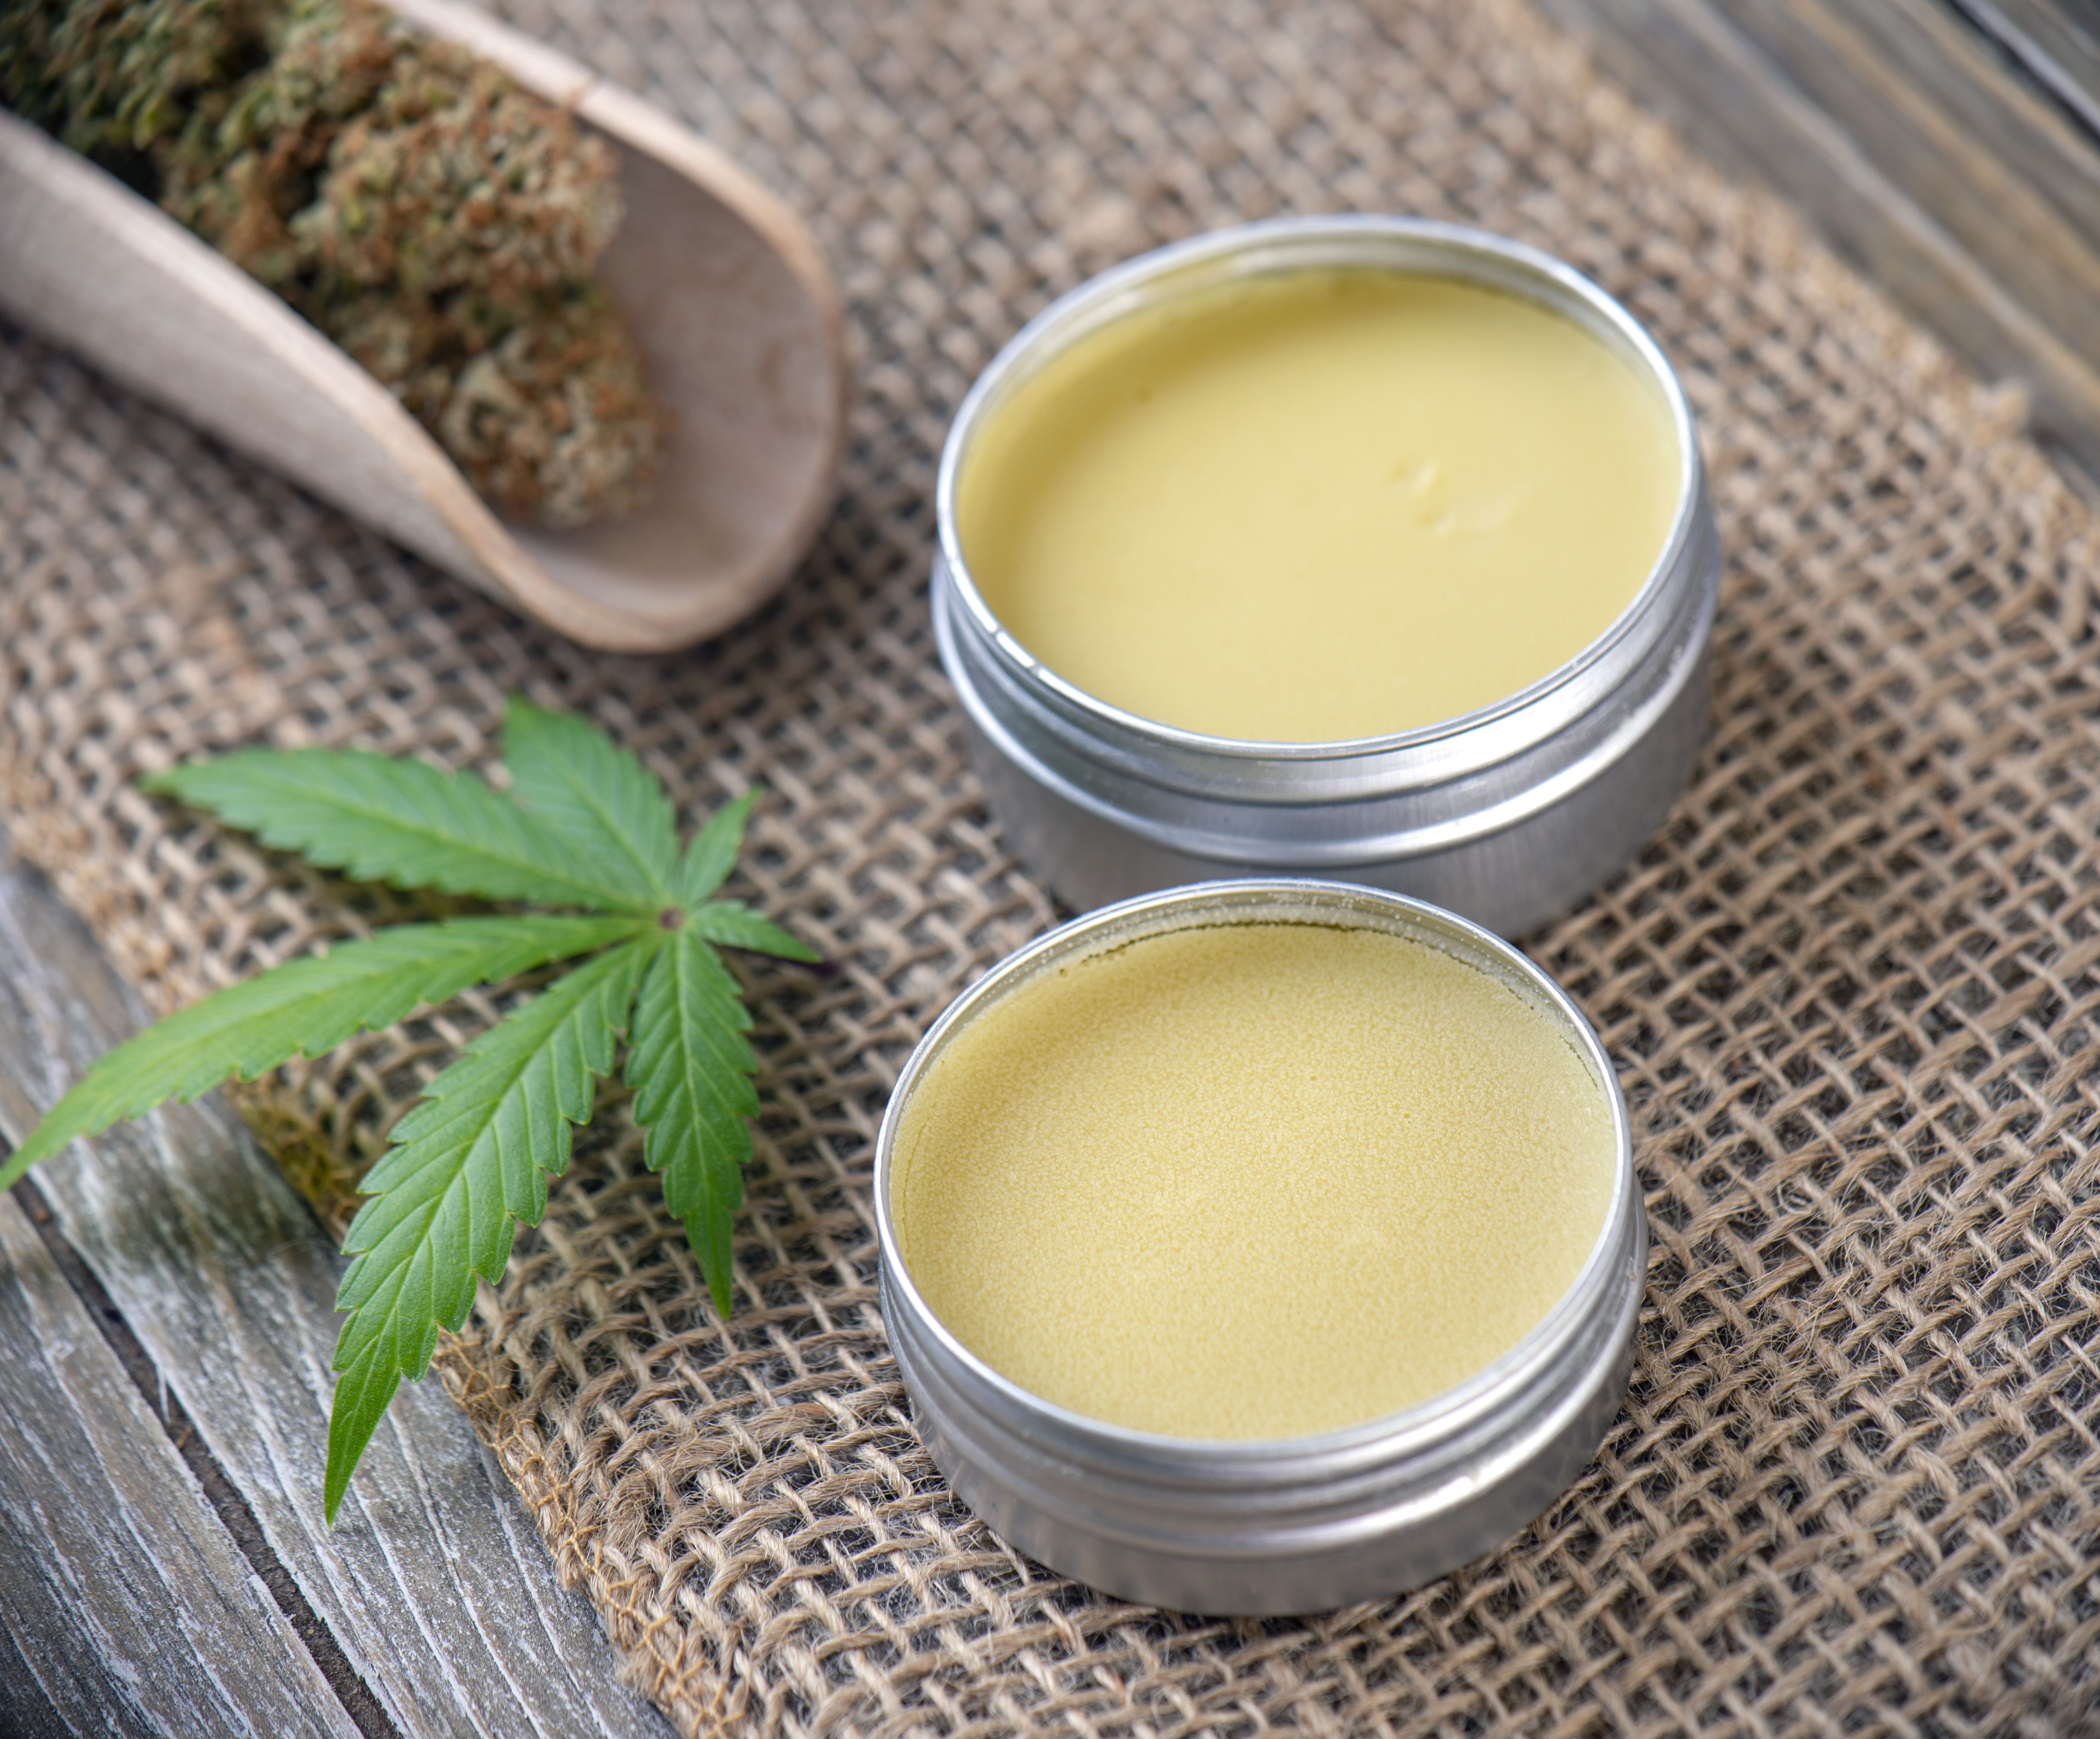 Are CBD skincare products effective?